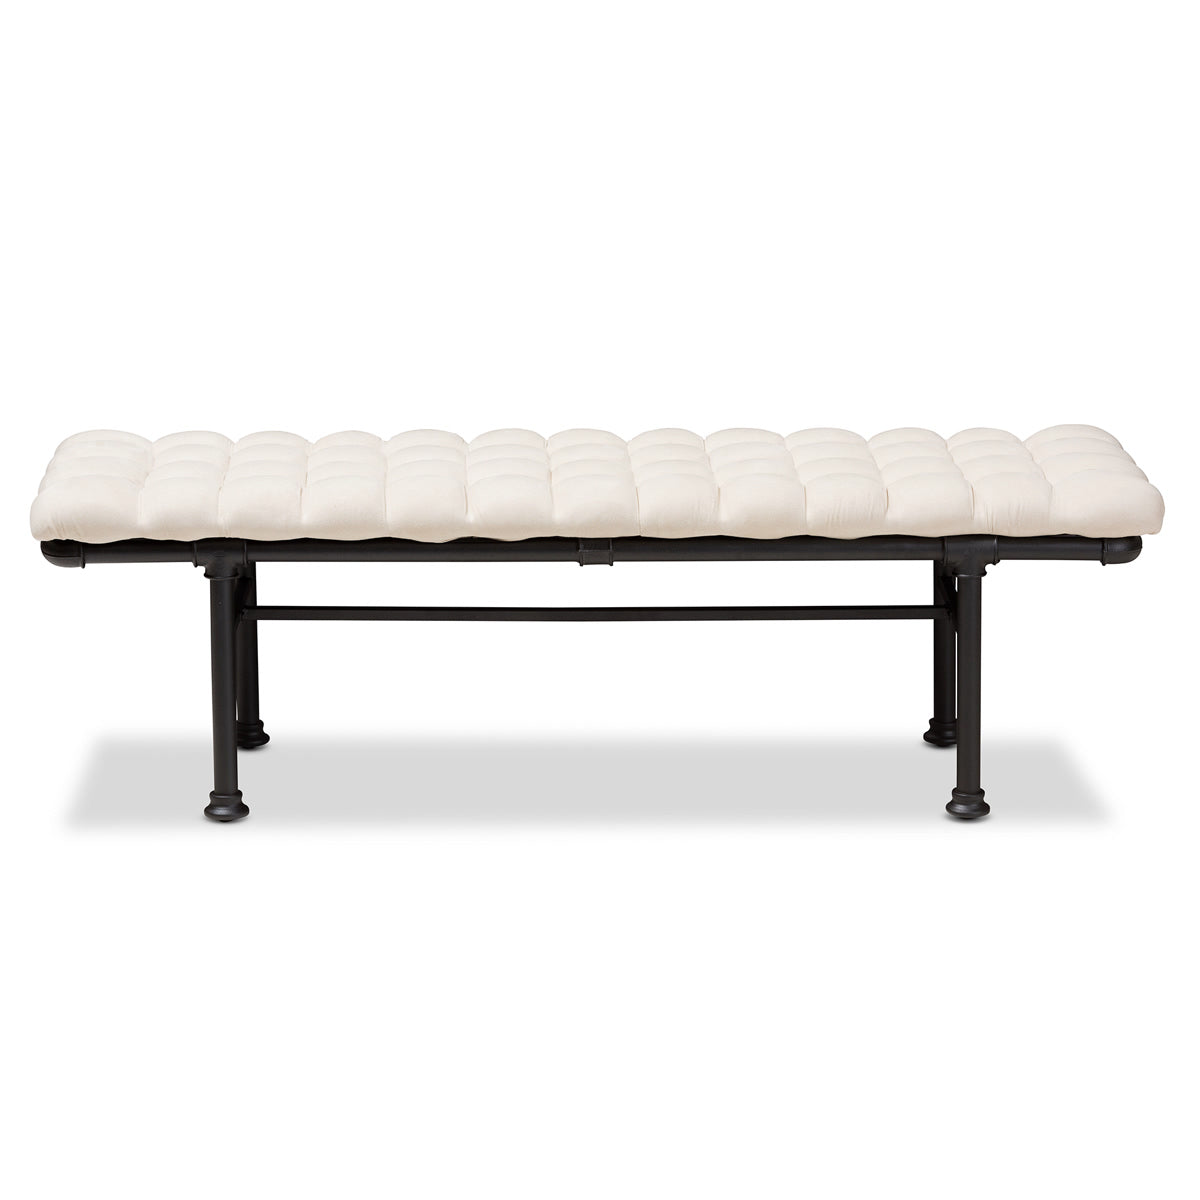 Baxton Studio Zelie Rustic and Industrial Light Beige Fabric Upholstered Bench Baxton Studio-benches-Minimal And Modern - 2